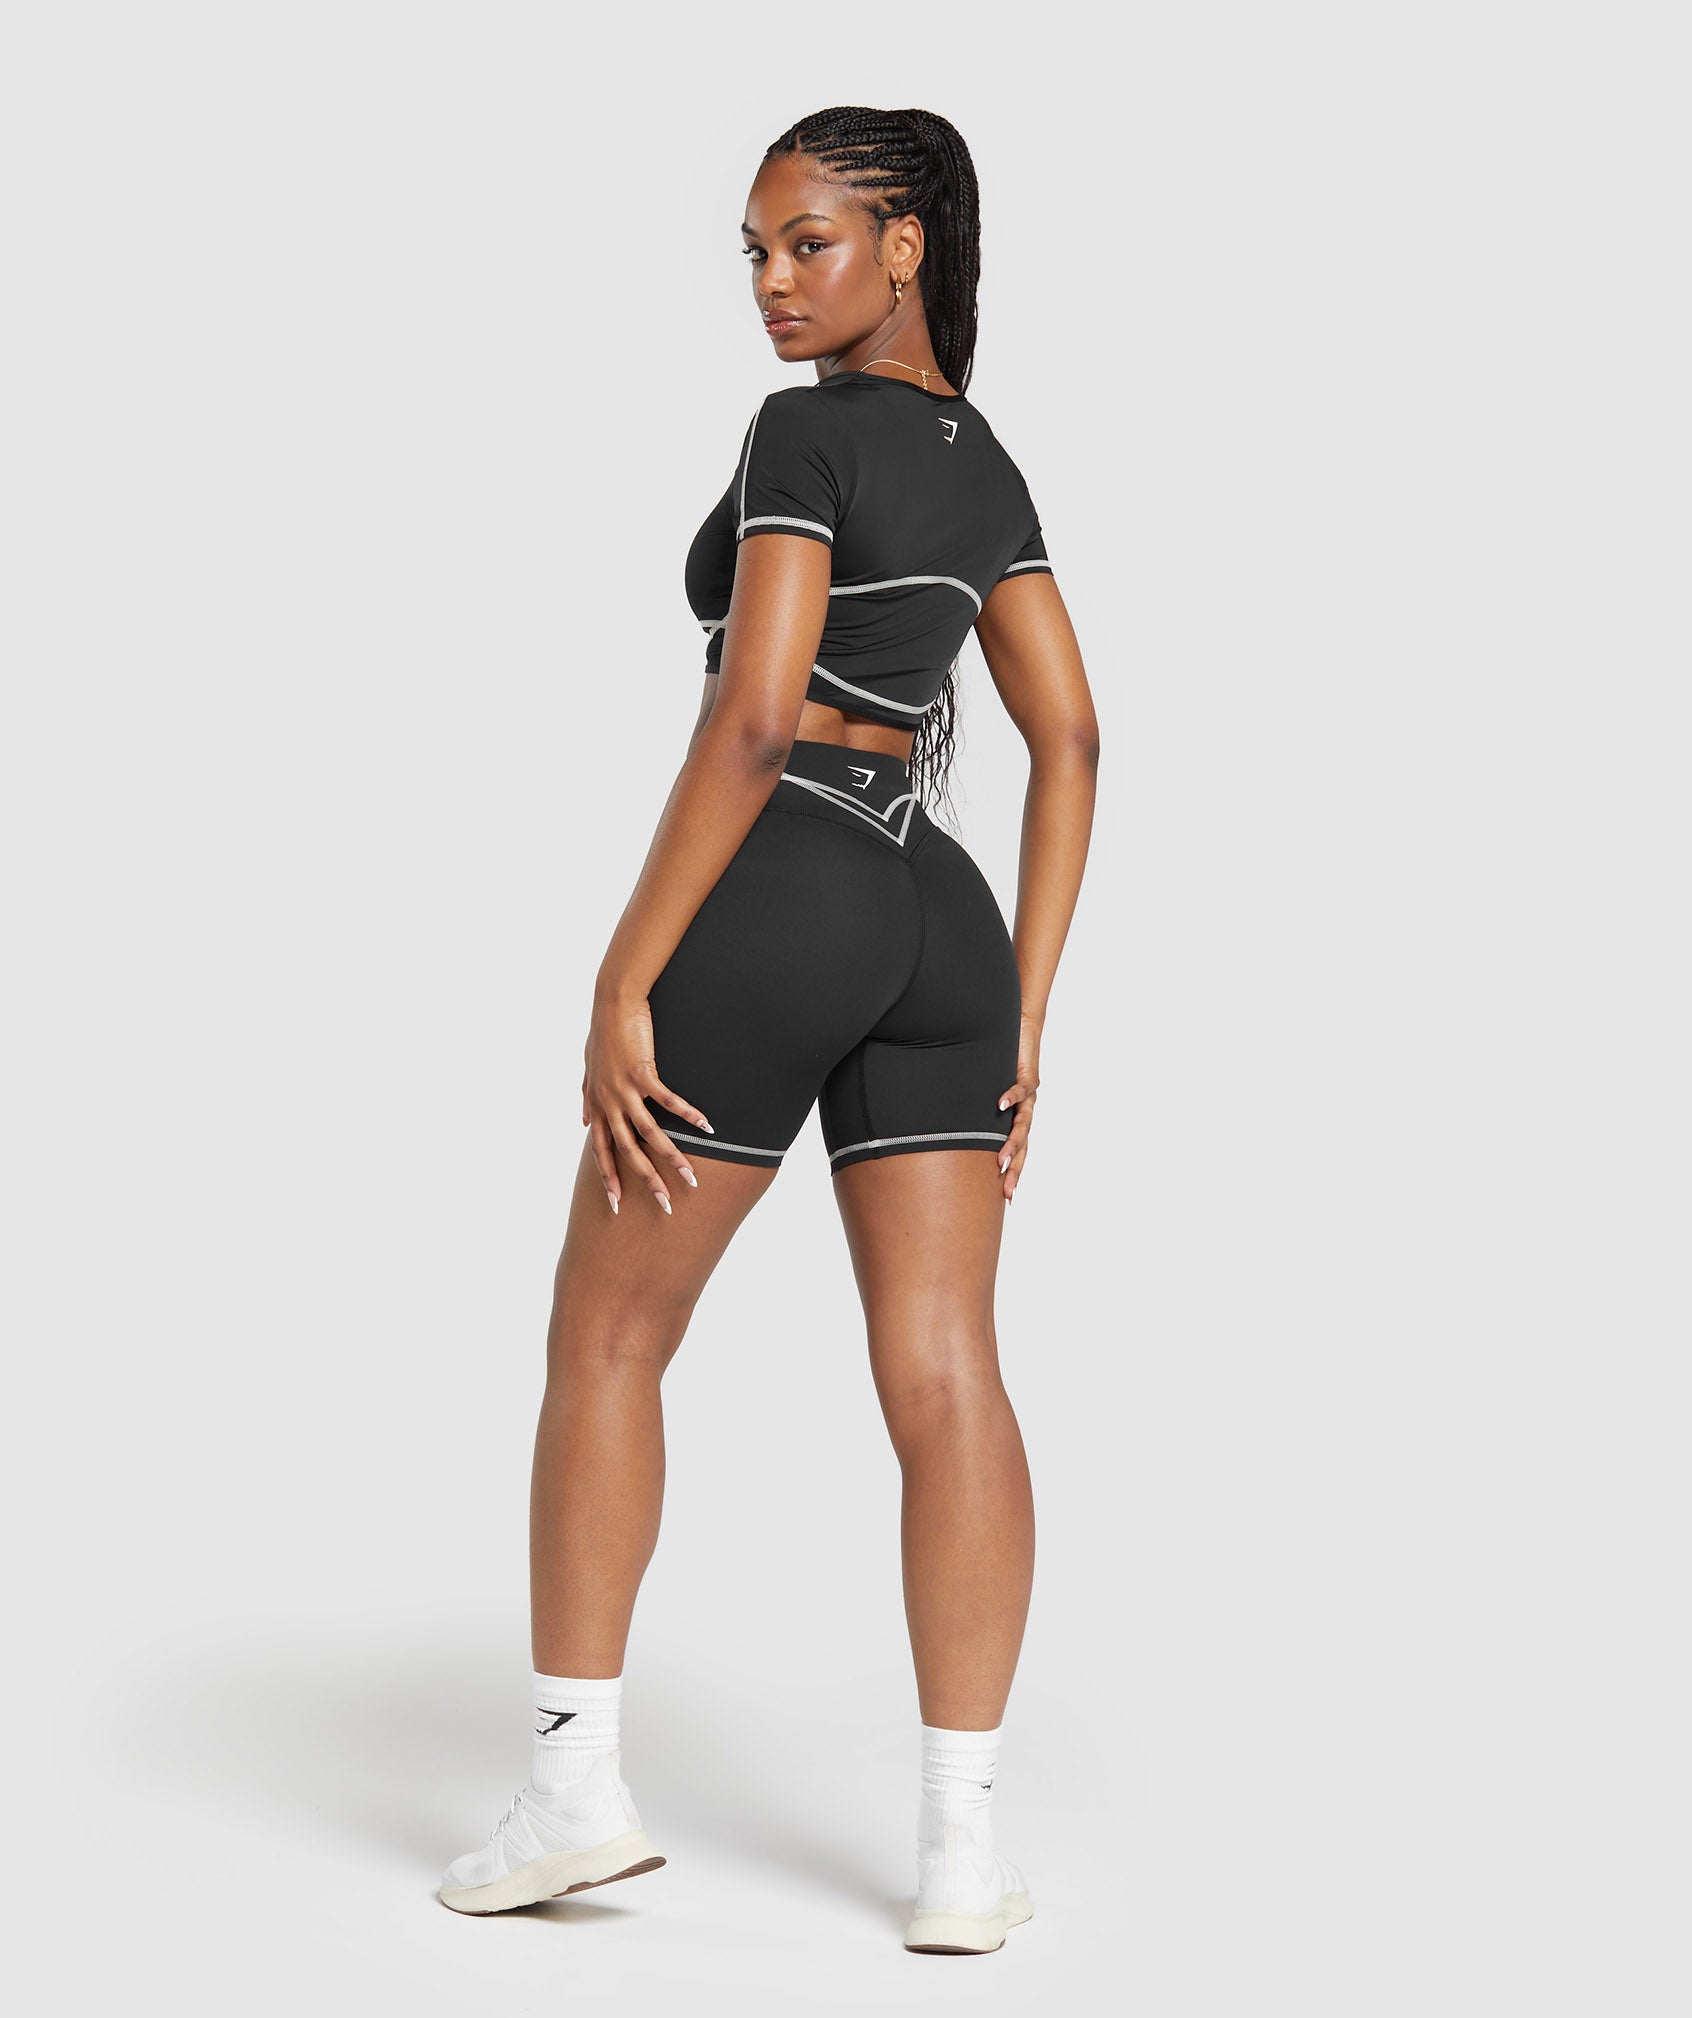 Stitch Feature Shorts in Black - view 4